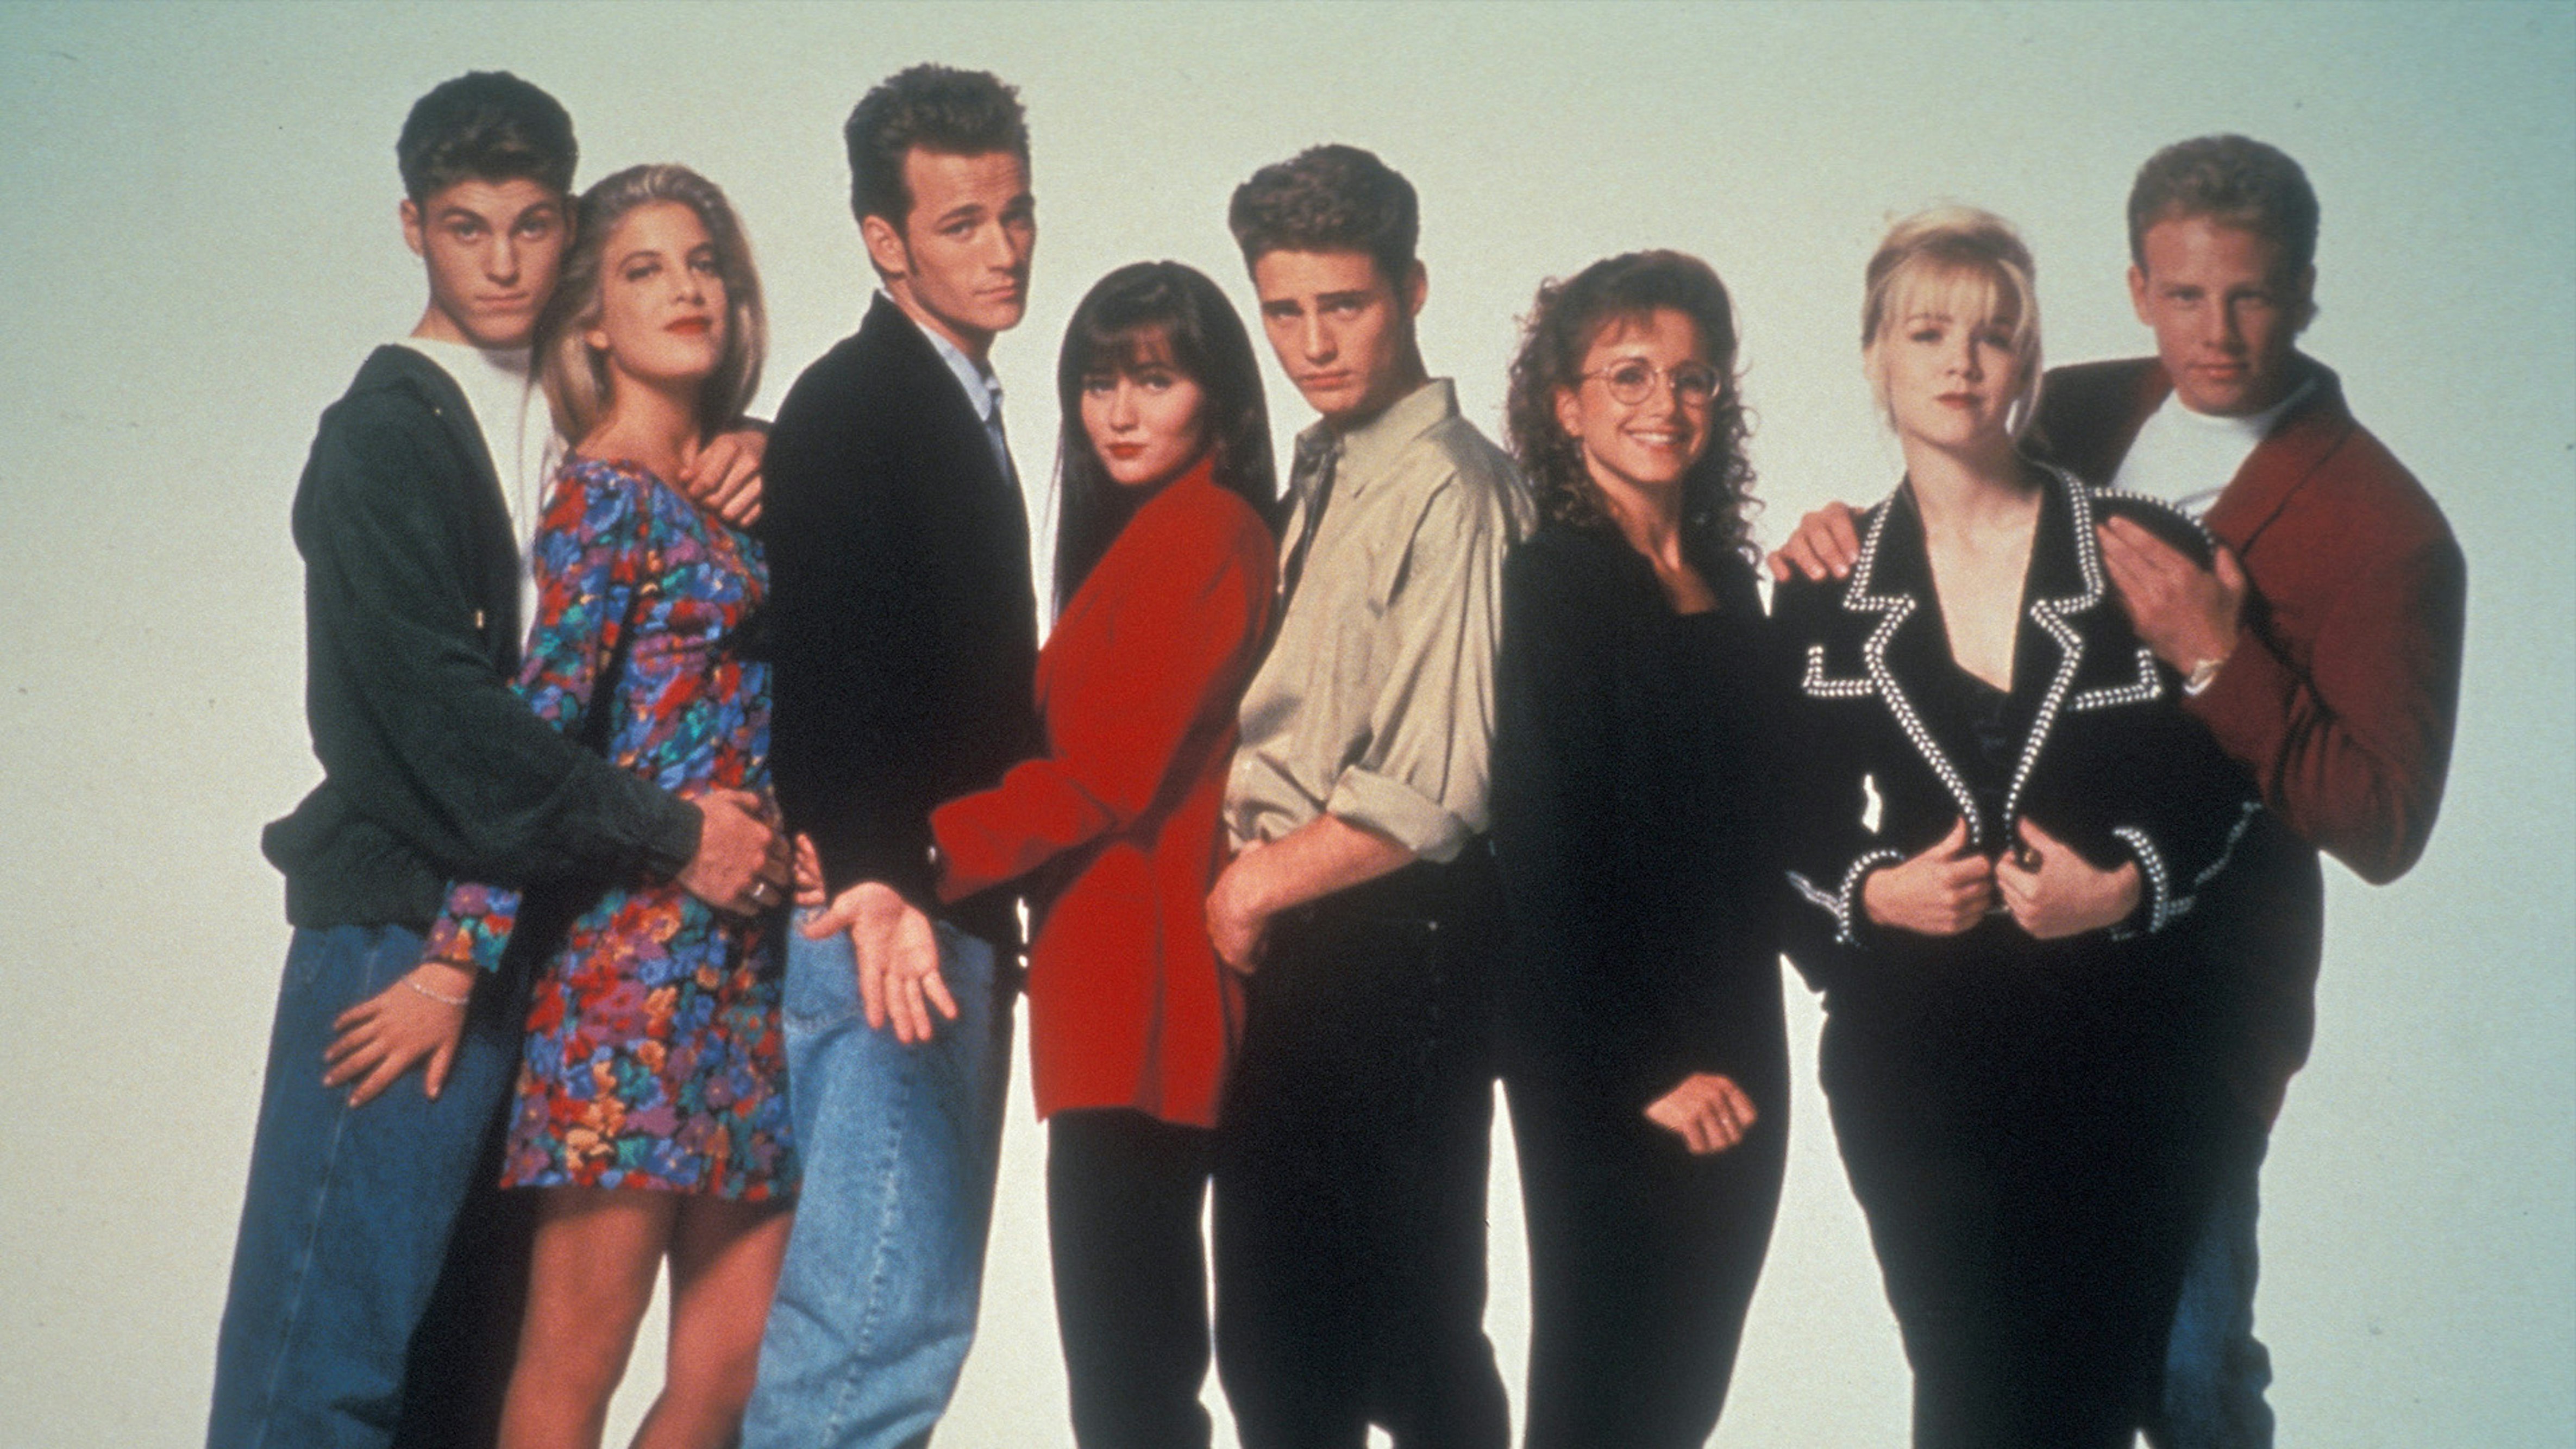 Beverly Hills 90210 - Watch Free on Pluto TV United States